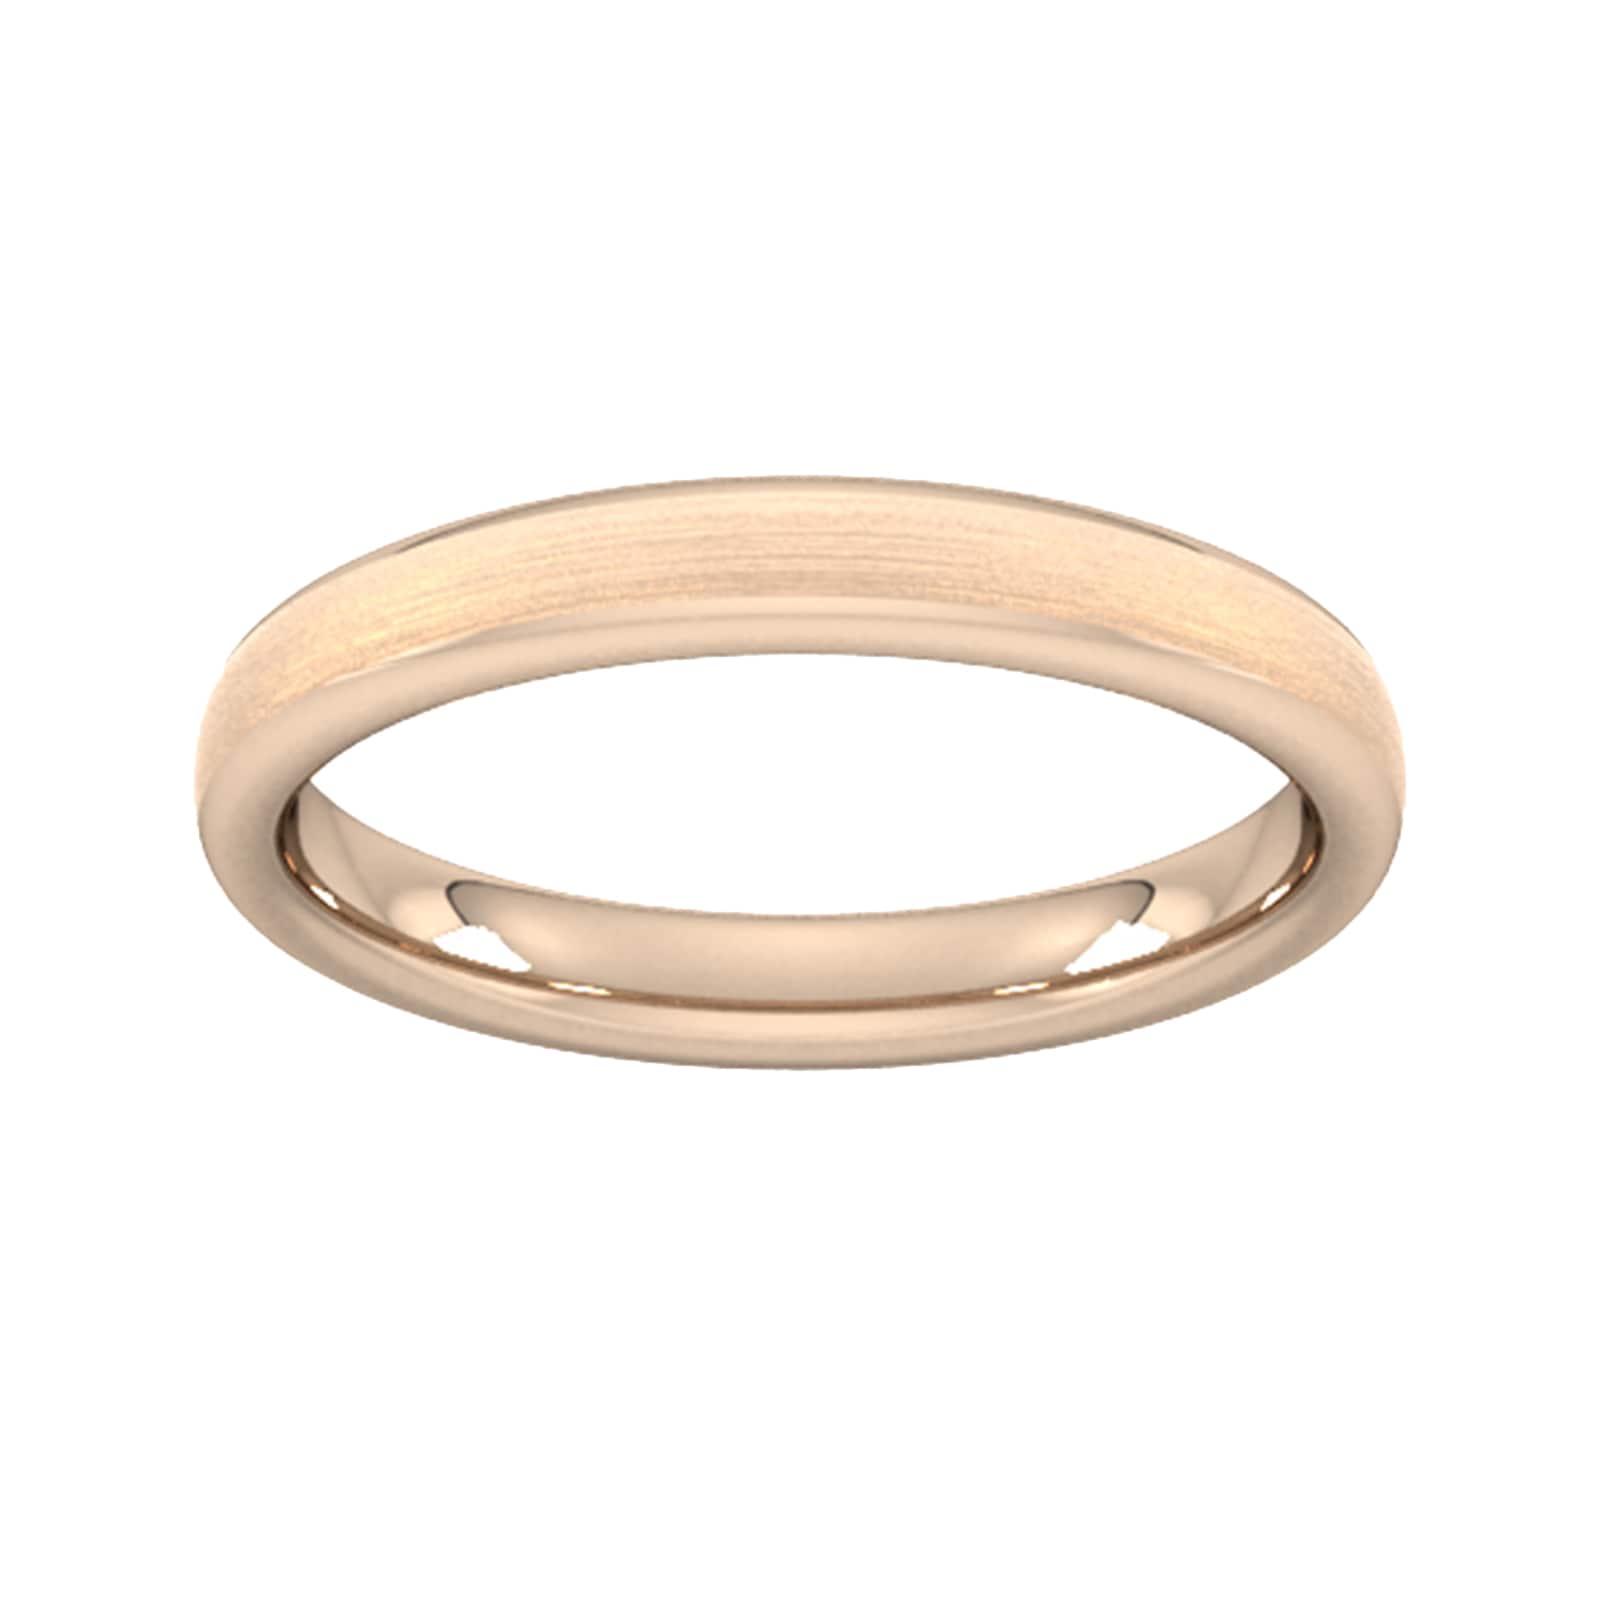 3mm D Shape Heavy Matt Finished Wedding Ring In 18 Carat Rose Gold - Ring Size X